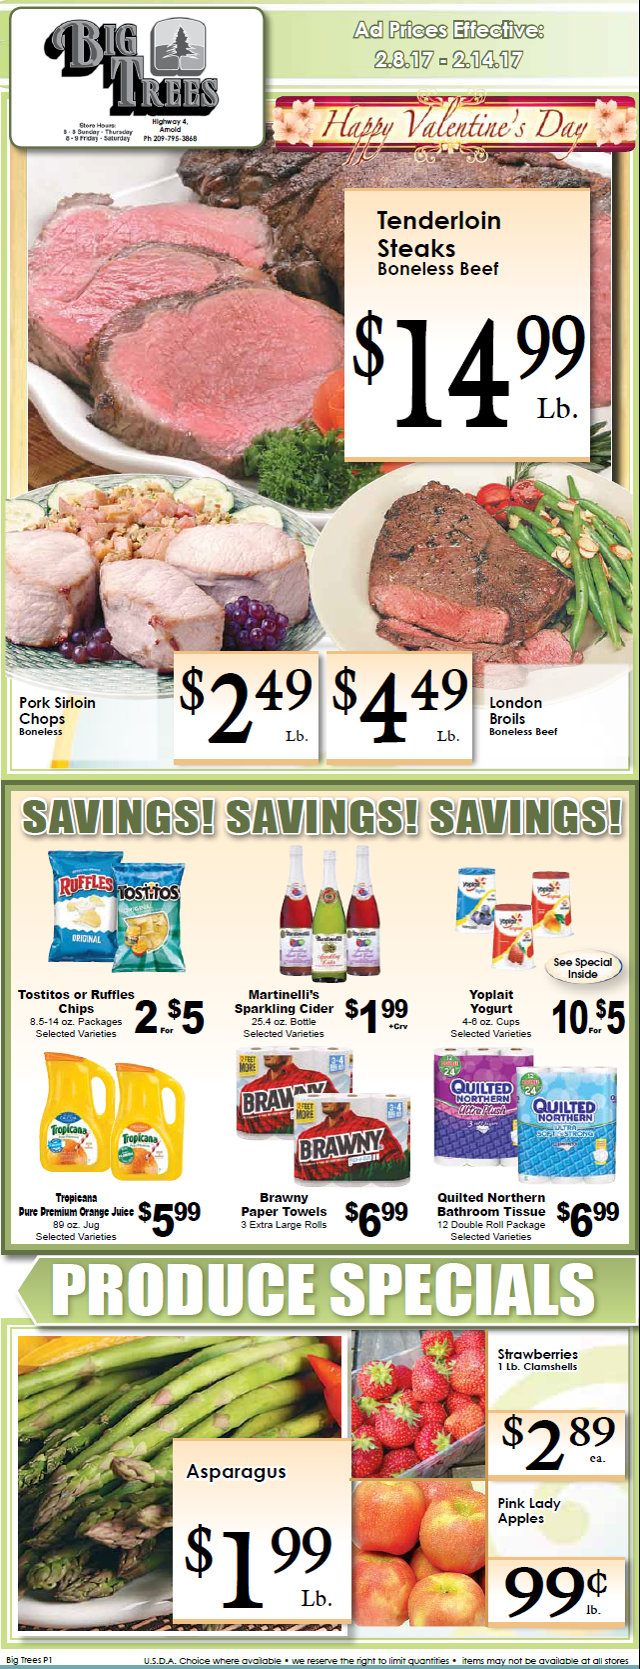 Big Trees Market Weekly Ad & Grocery Specials Through February 14th